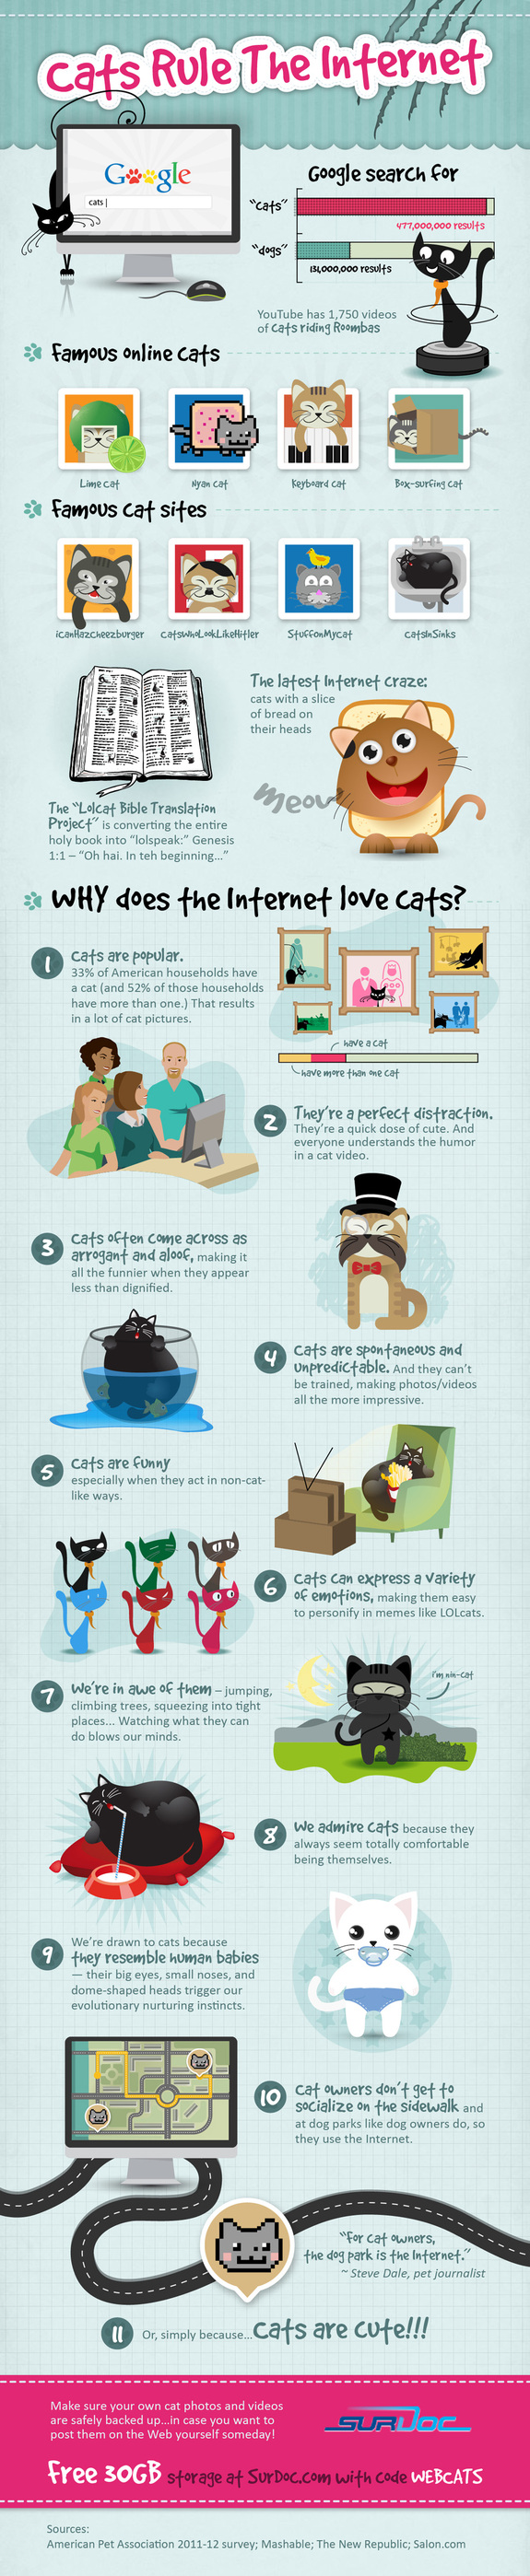 Cats Rule the Internet infographic